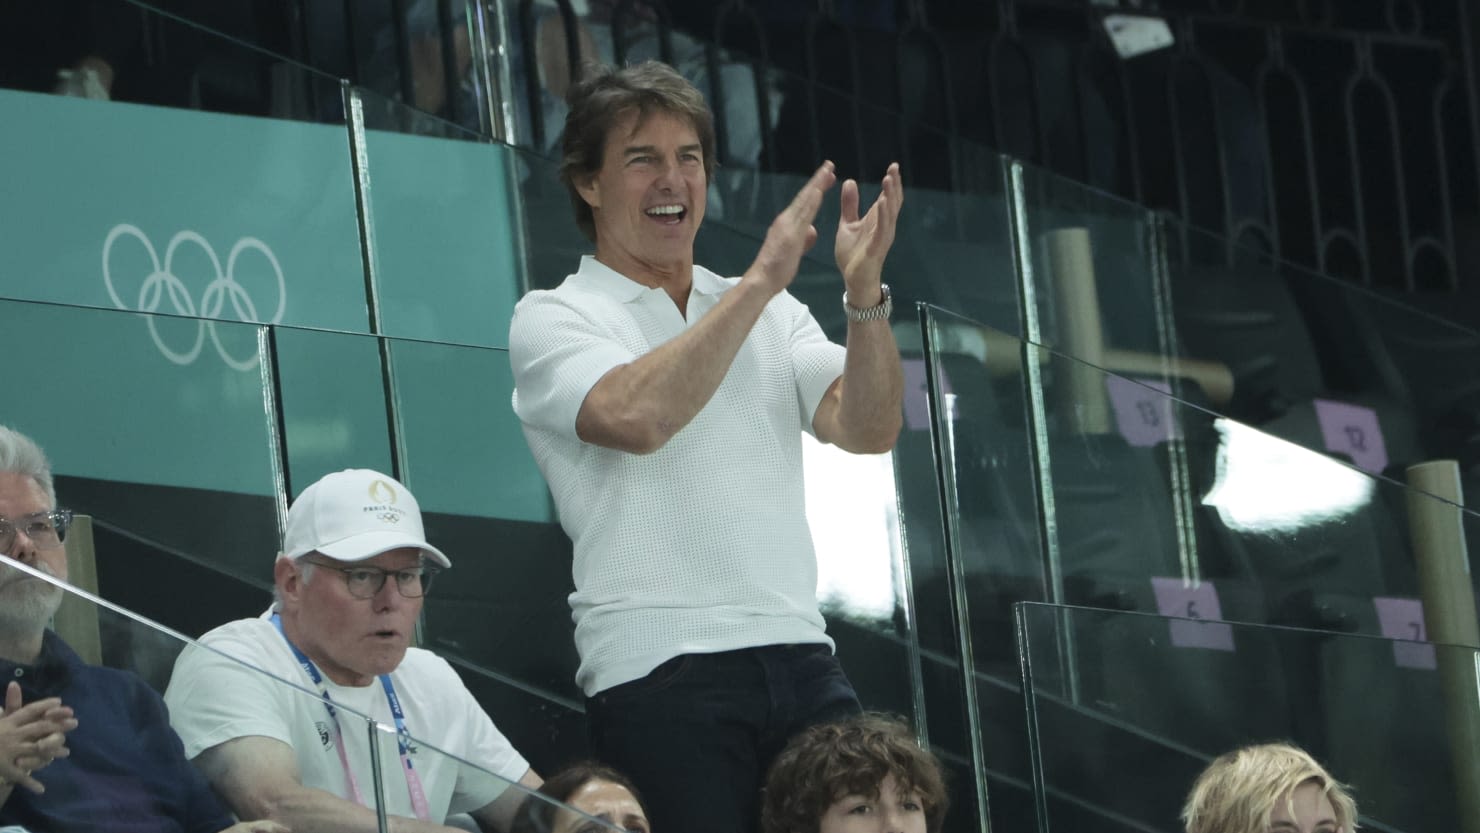 Tom Cruise Expected to Perform Stunt to Close Out Paris Olympics